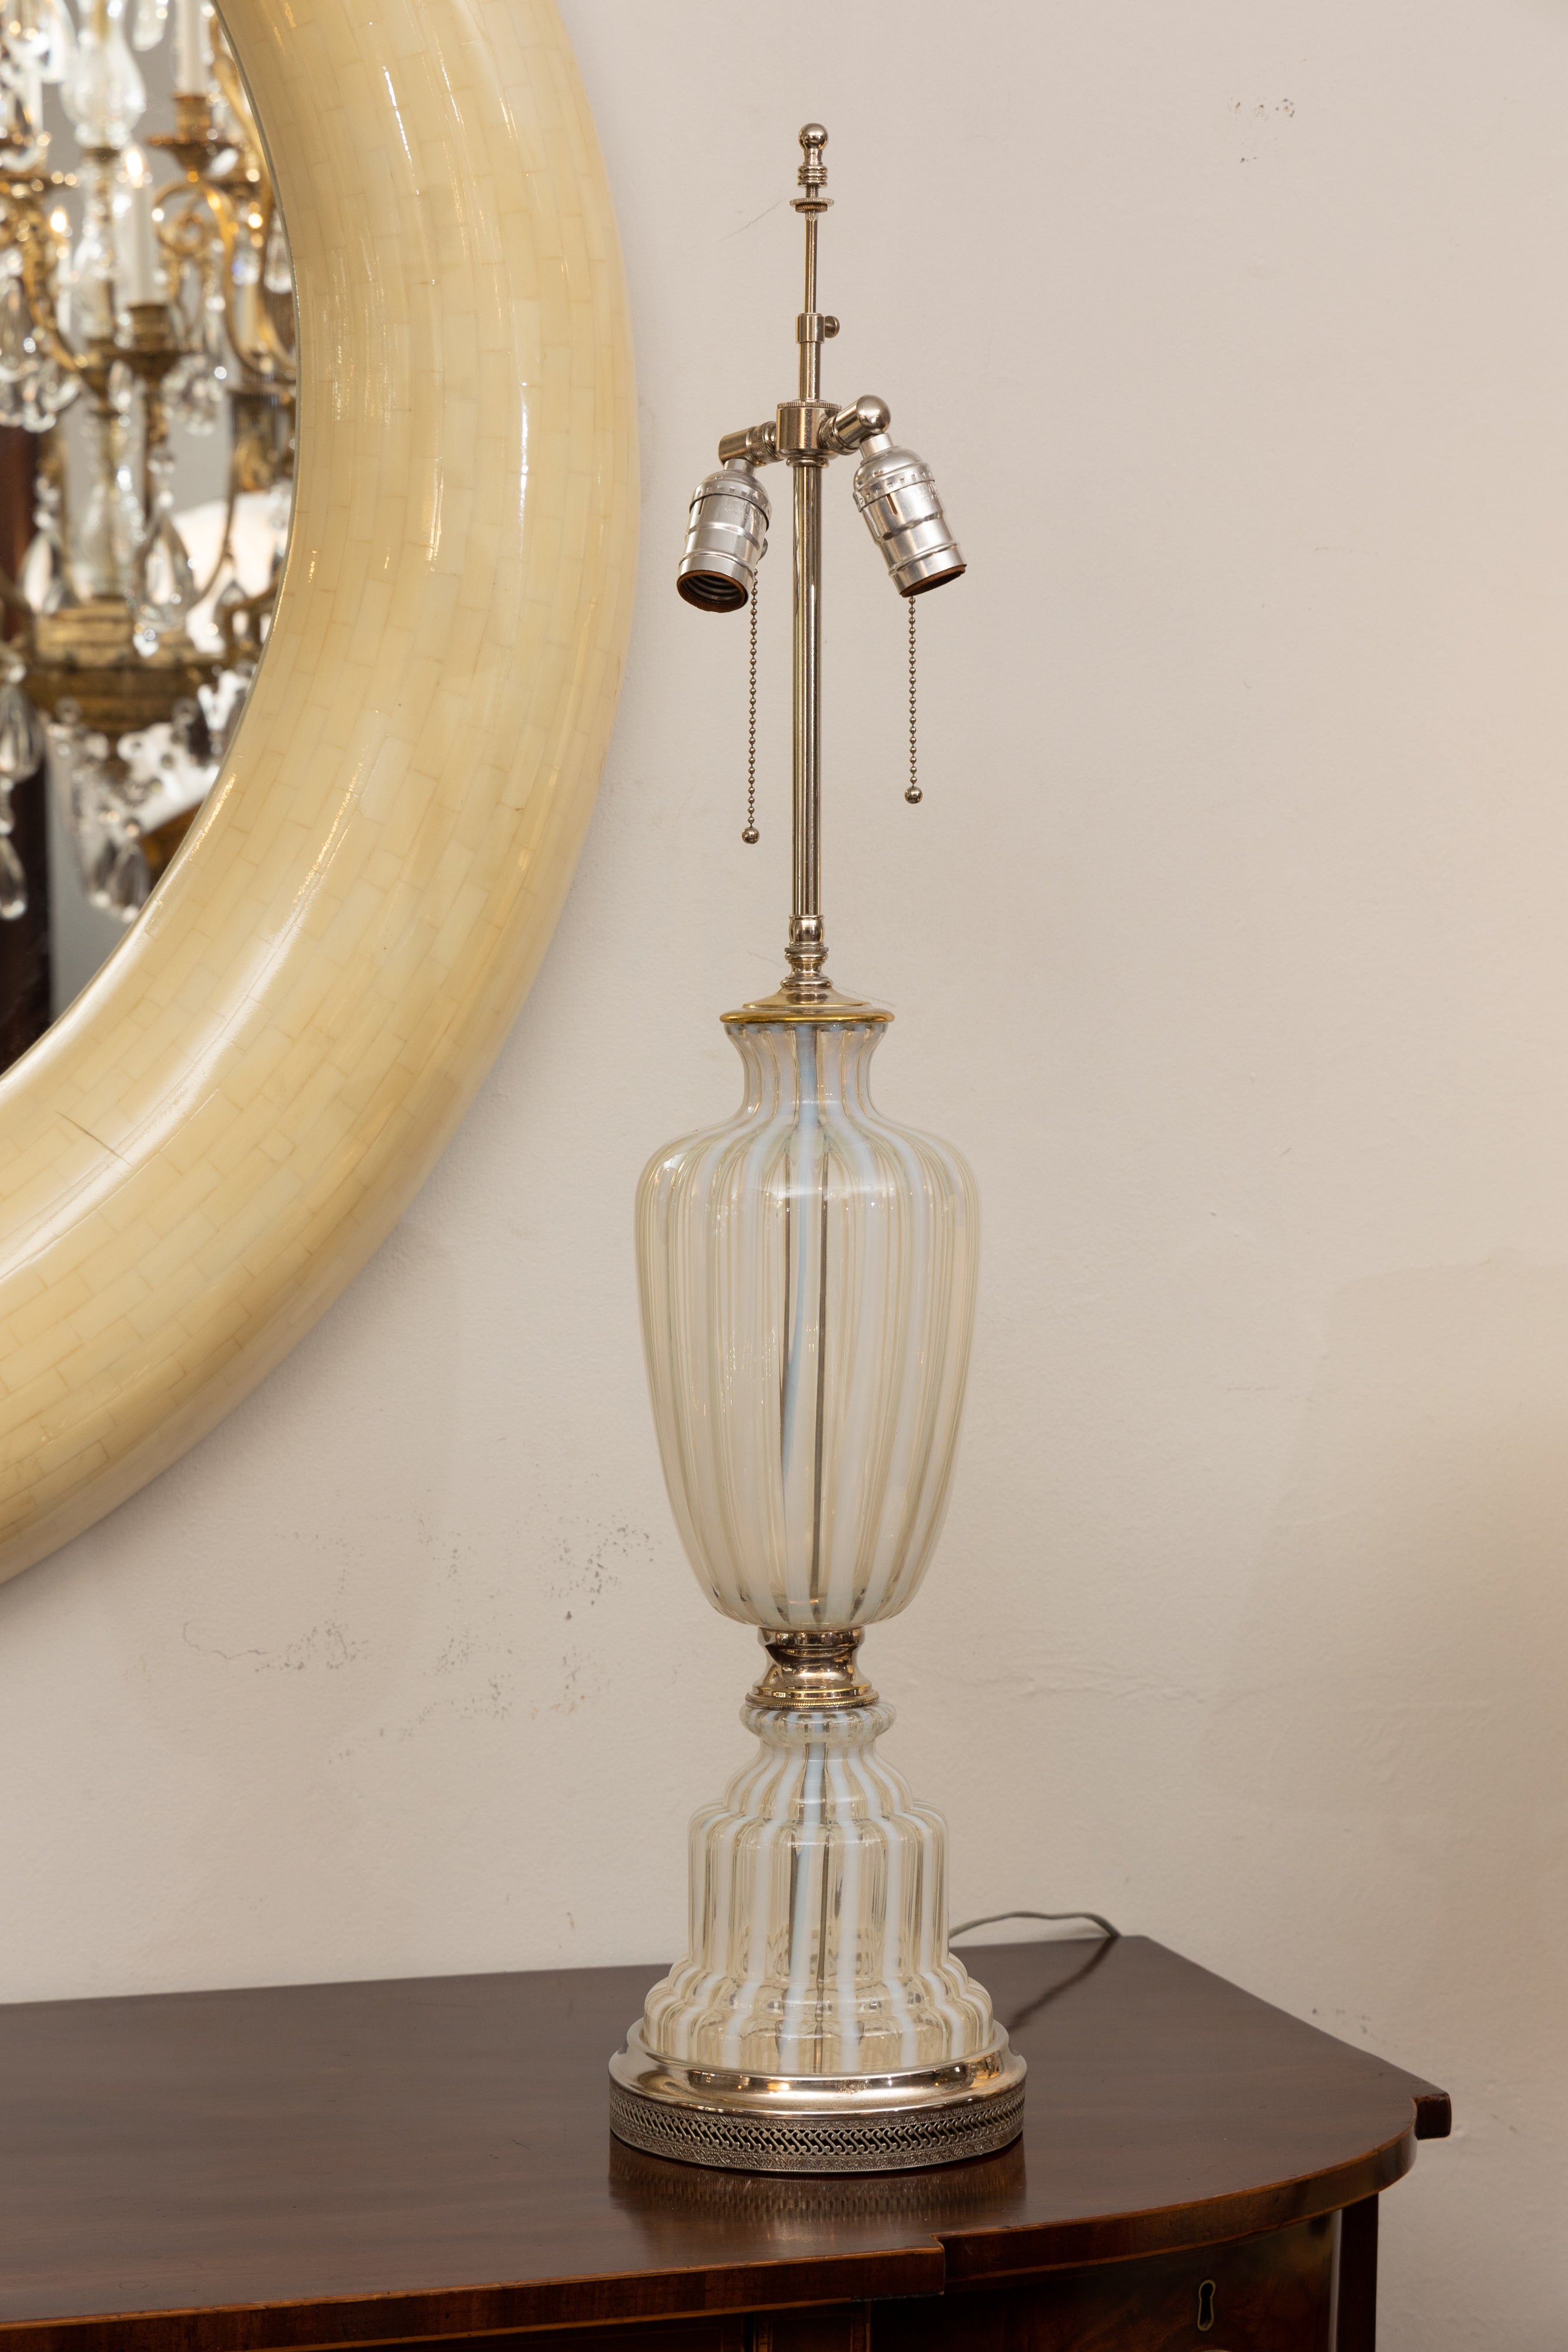 This is a lovely pair of Italian Murano urn-form glass lamps comprised of repetitive alternating stripes of white and clear glass, early 20th century.